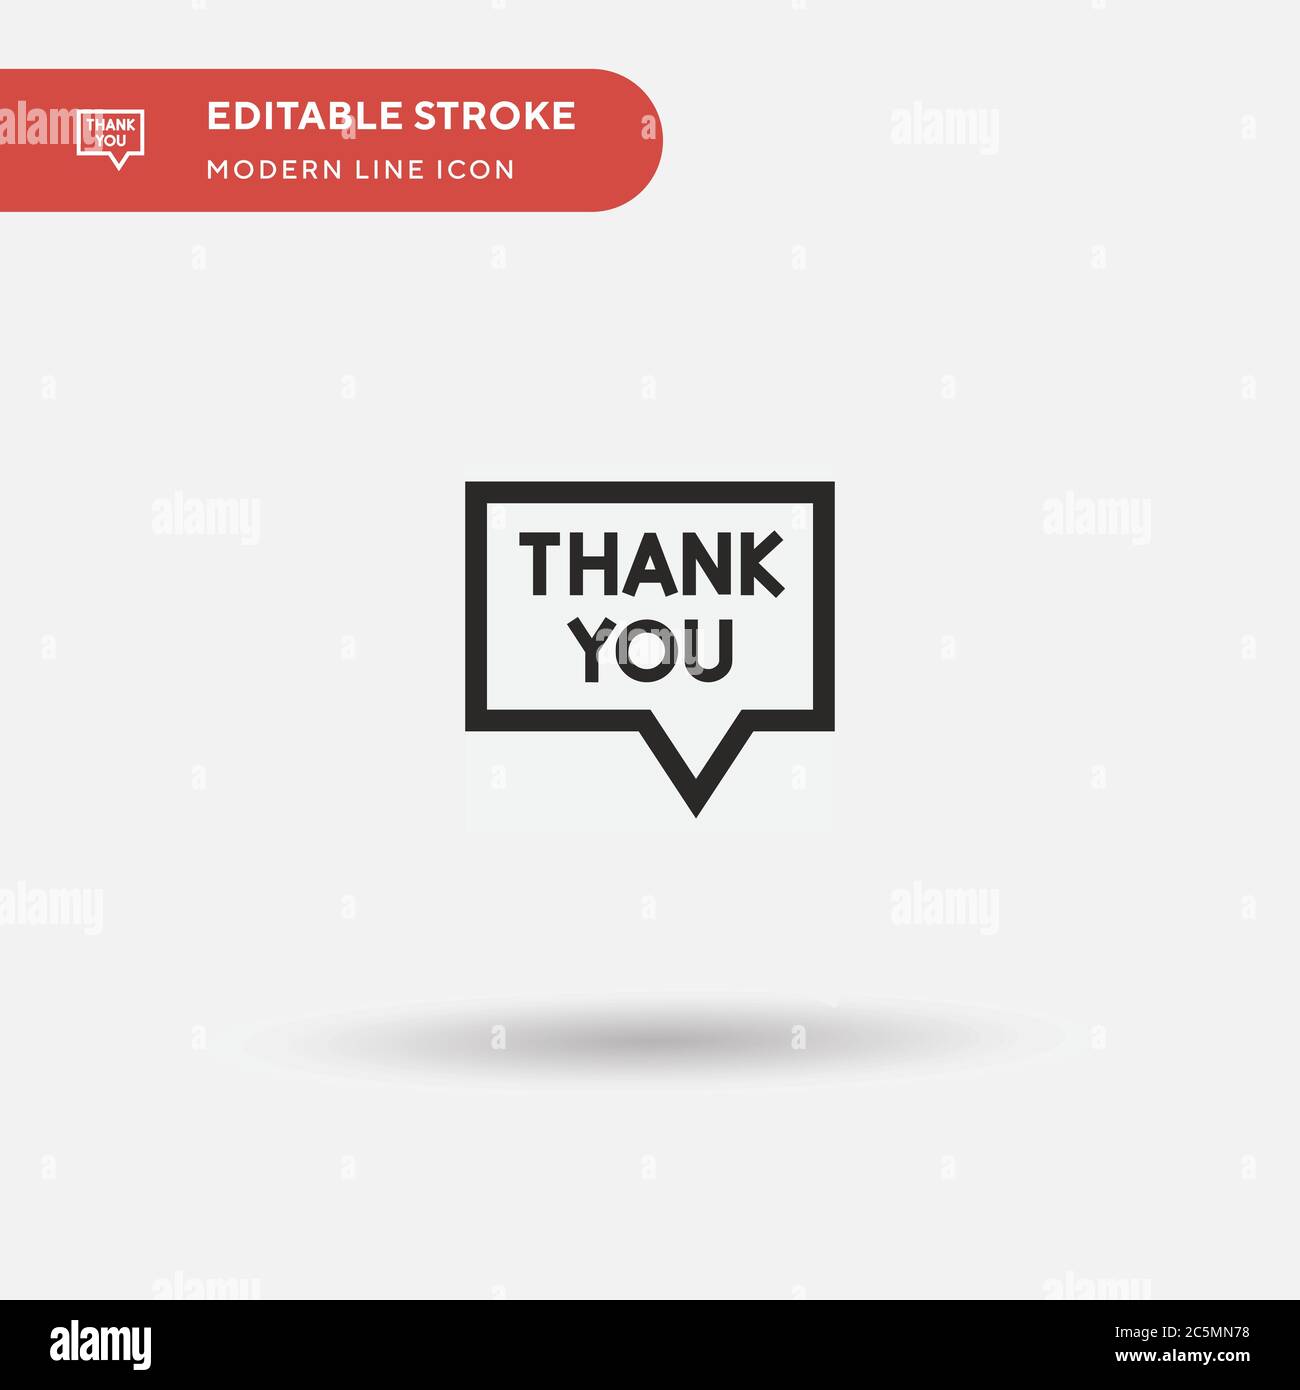 Thank You For Your Business Template from c8.alamy.com